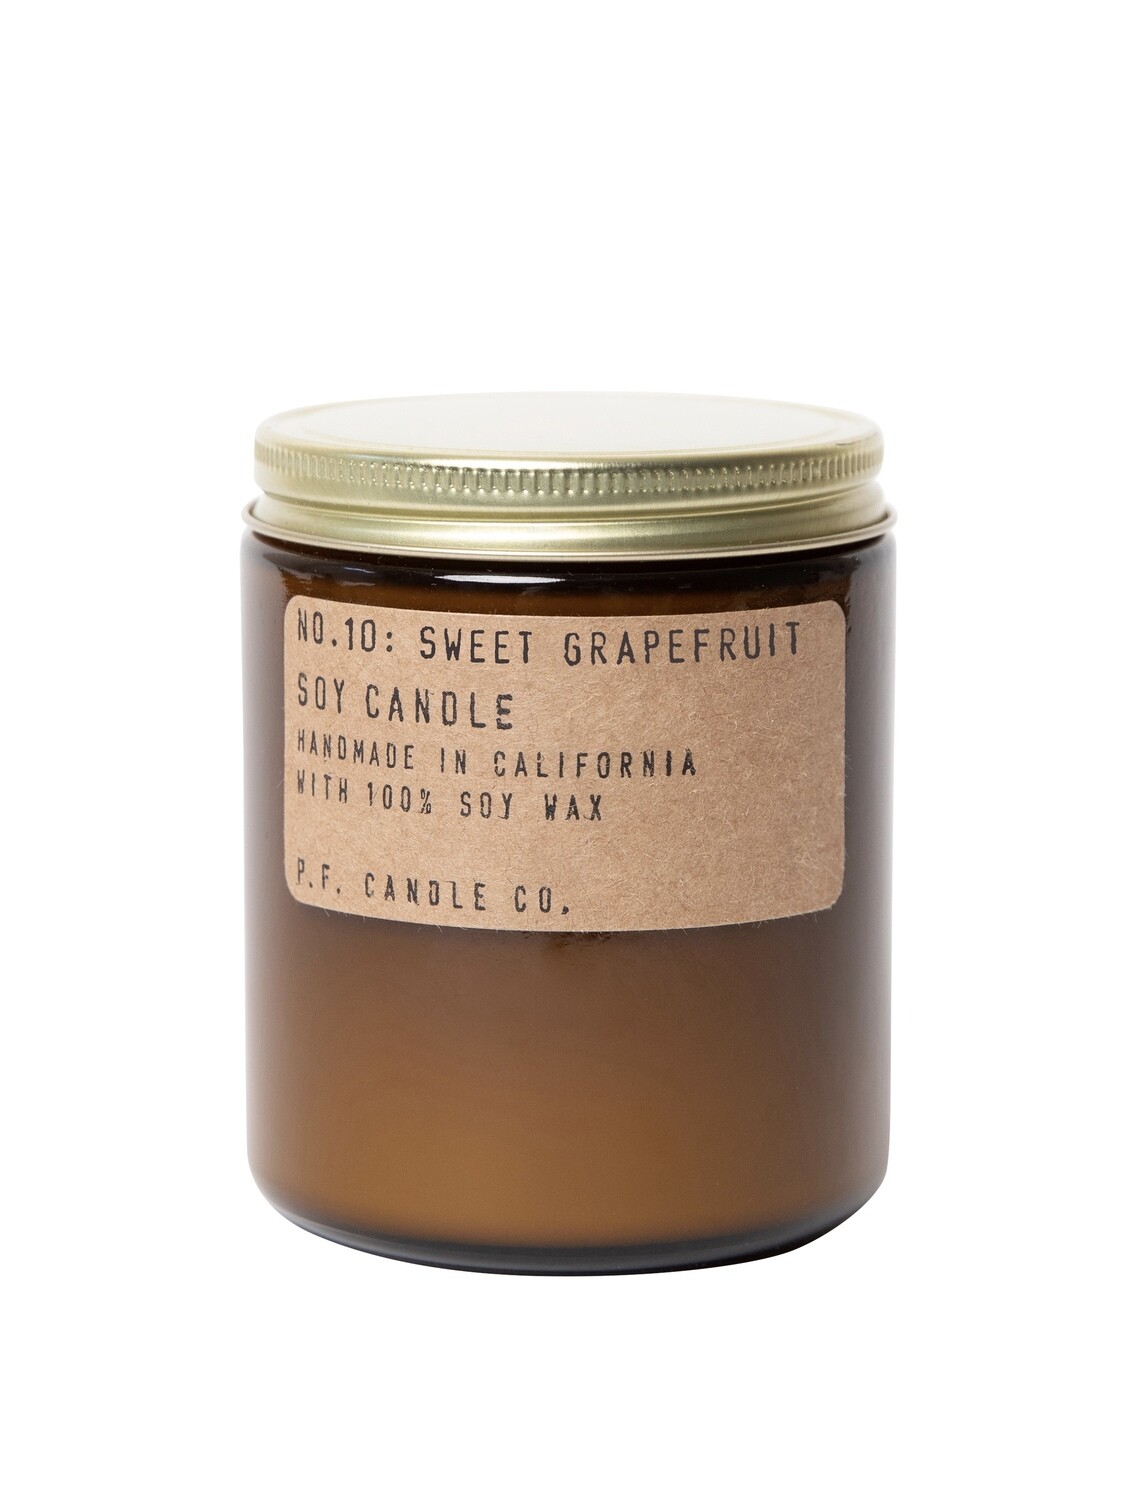 Sweet Grapefruit 7.2 oz Soy Candle - P.F. Candle Co.